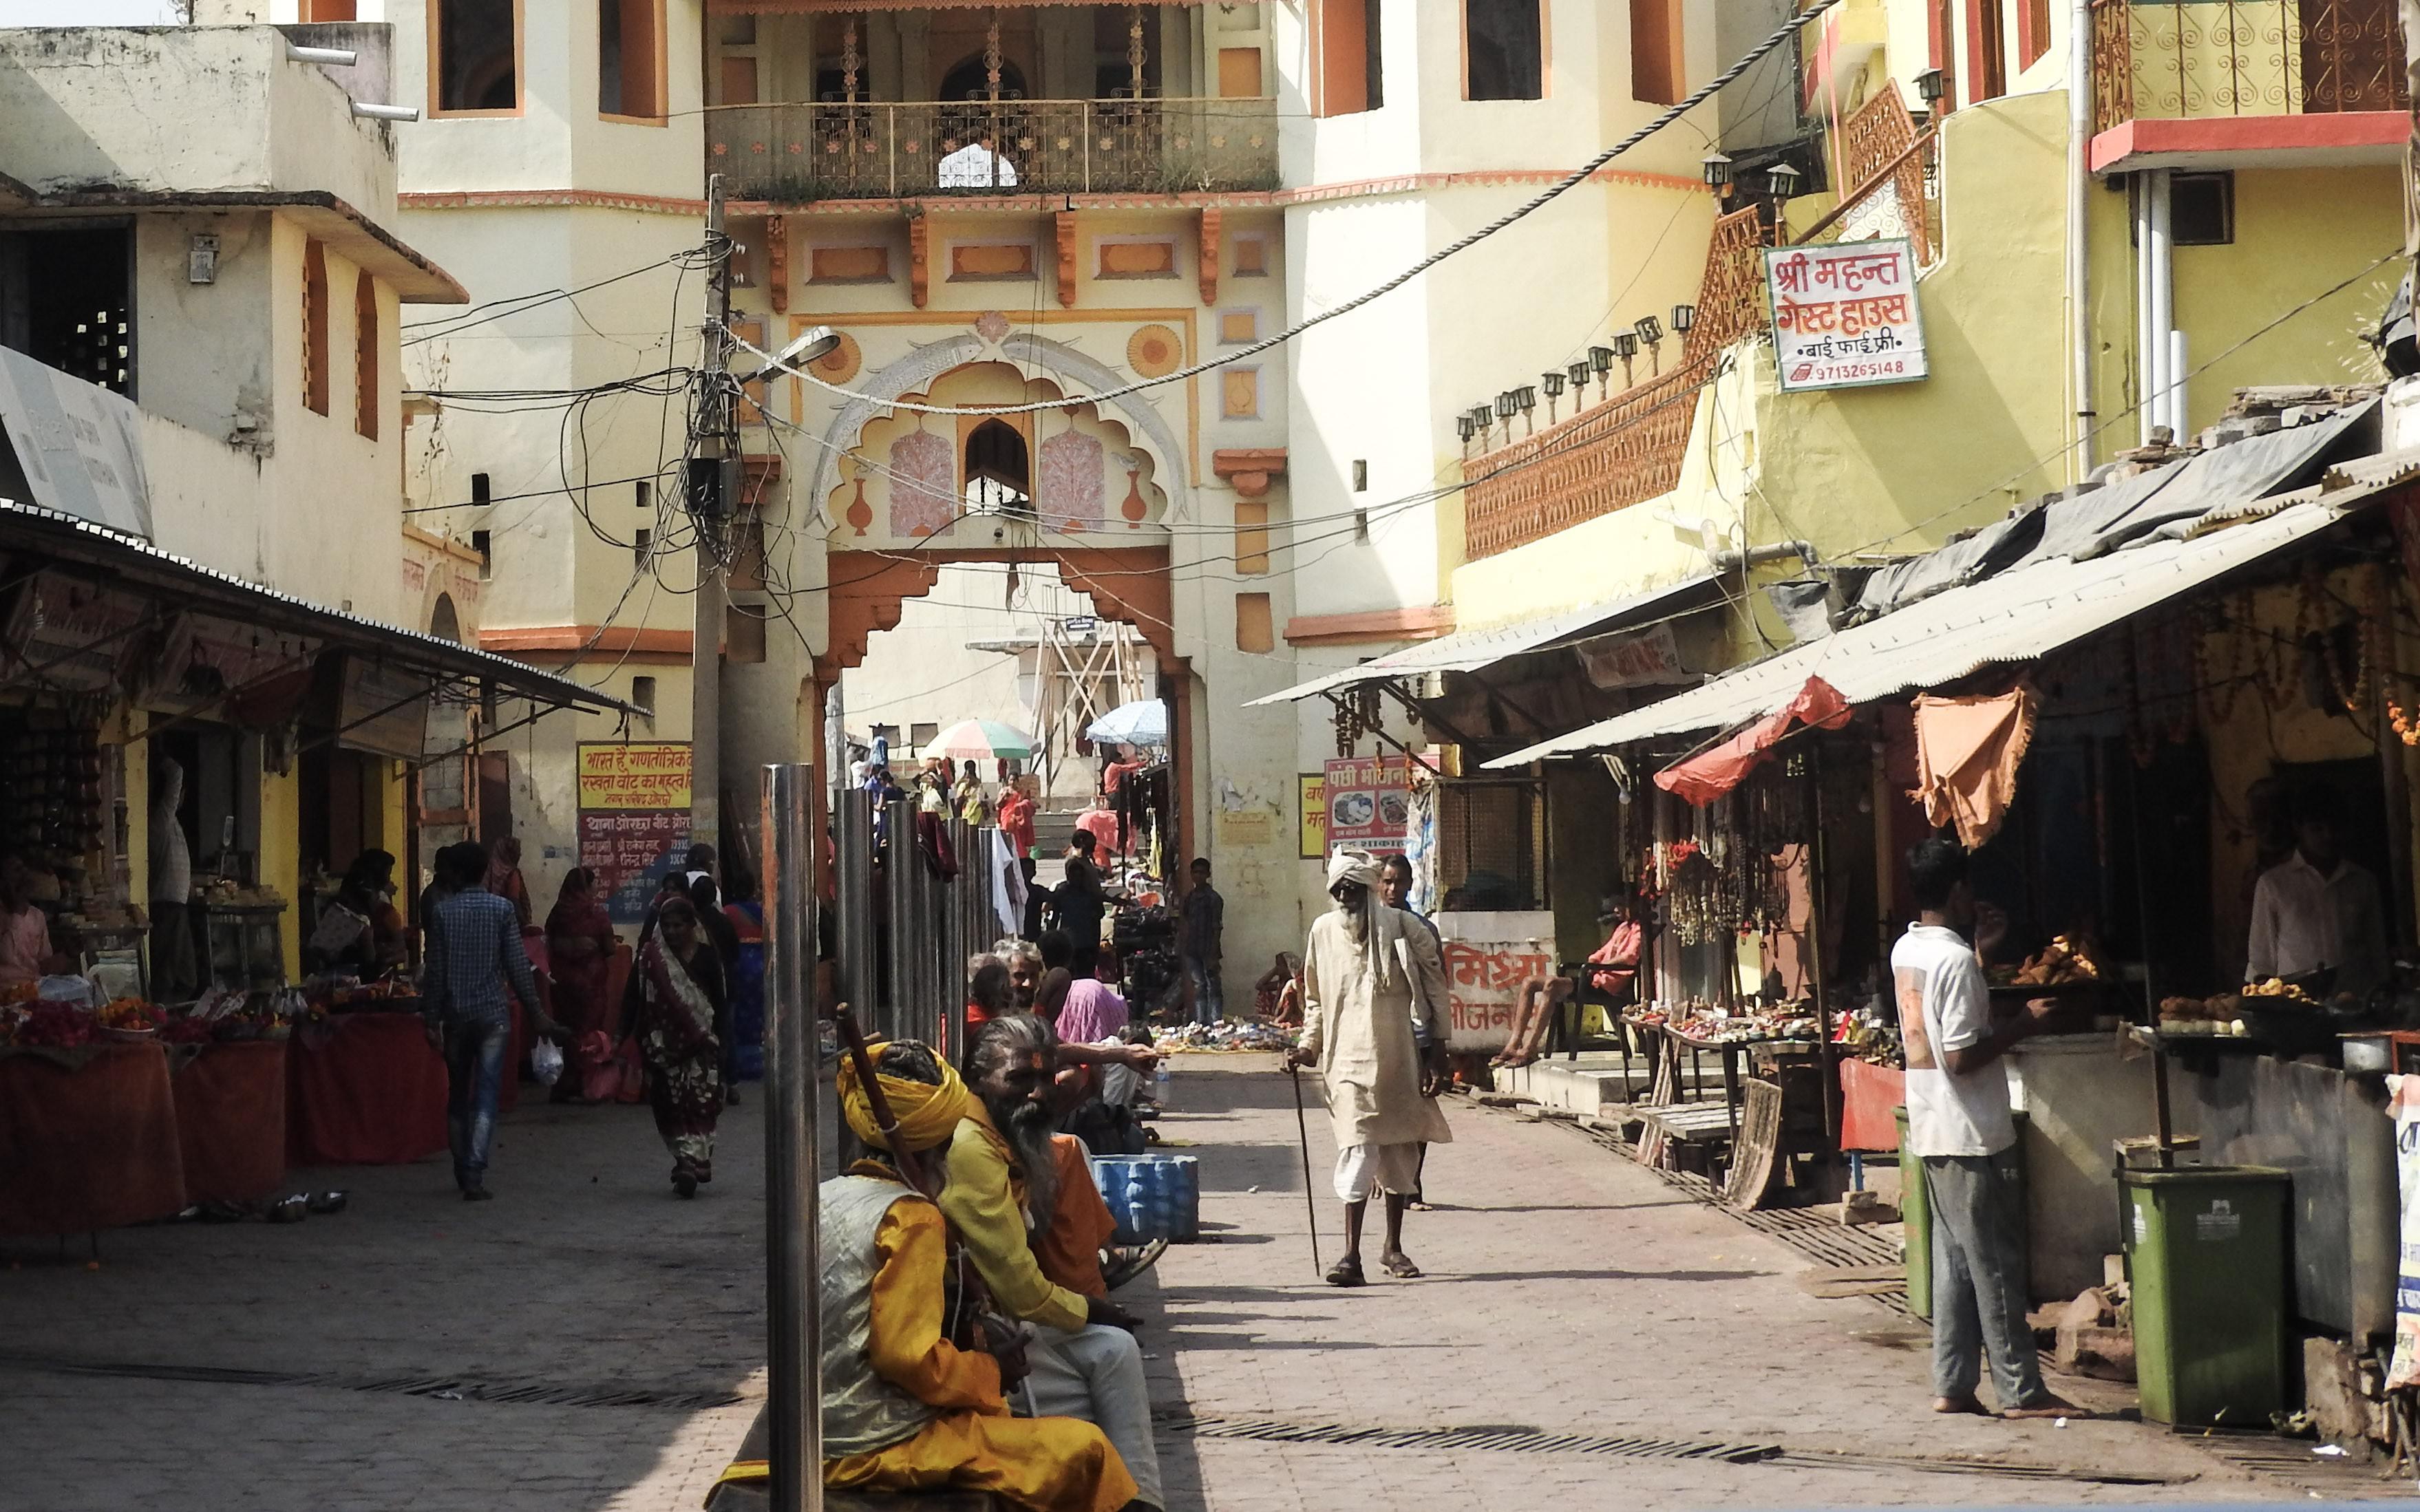 Around the Shri Ram Raja Temple, the lively streets are dotted with devotees and stores selling temple offerings.